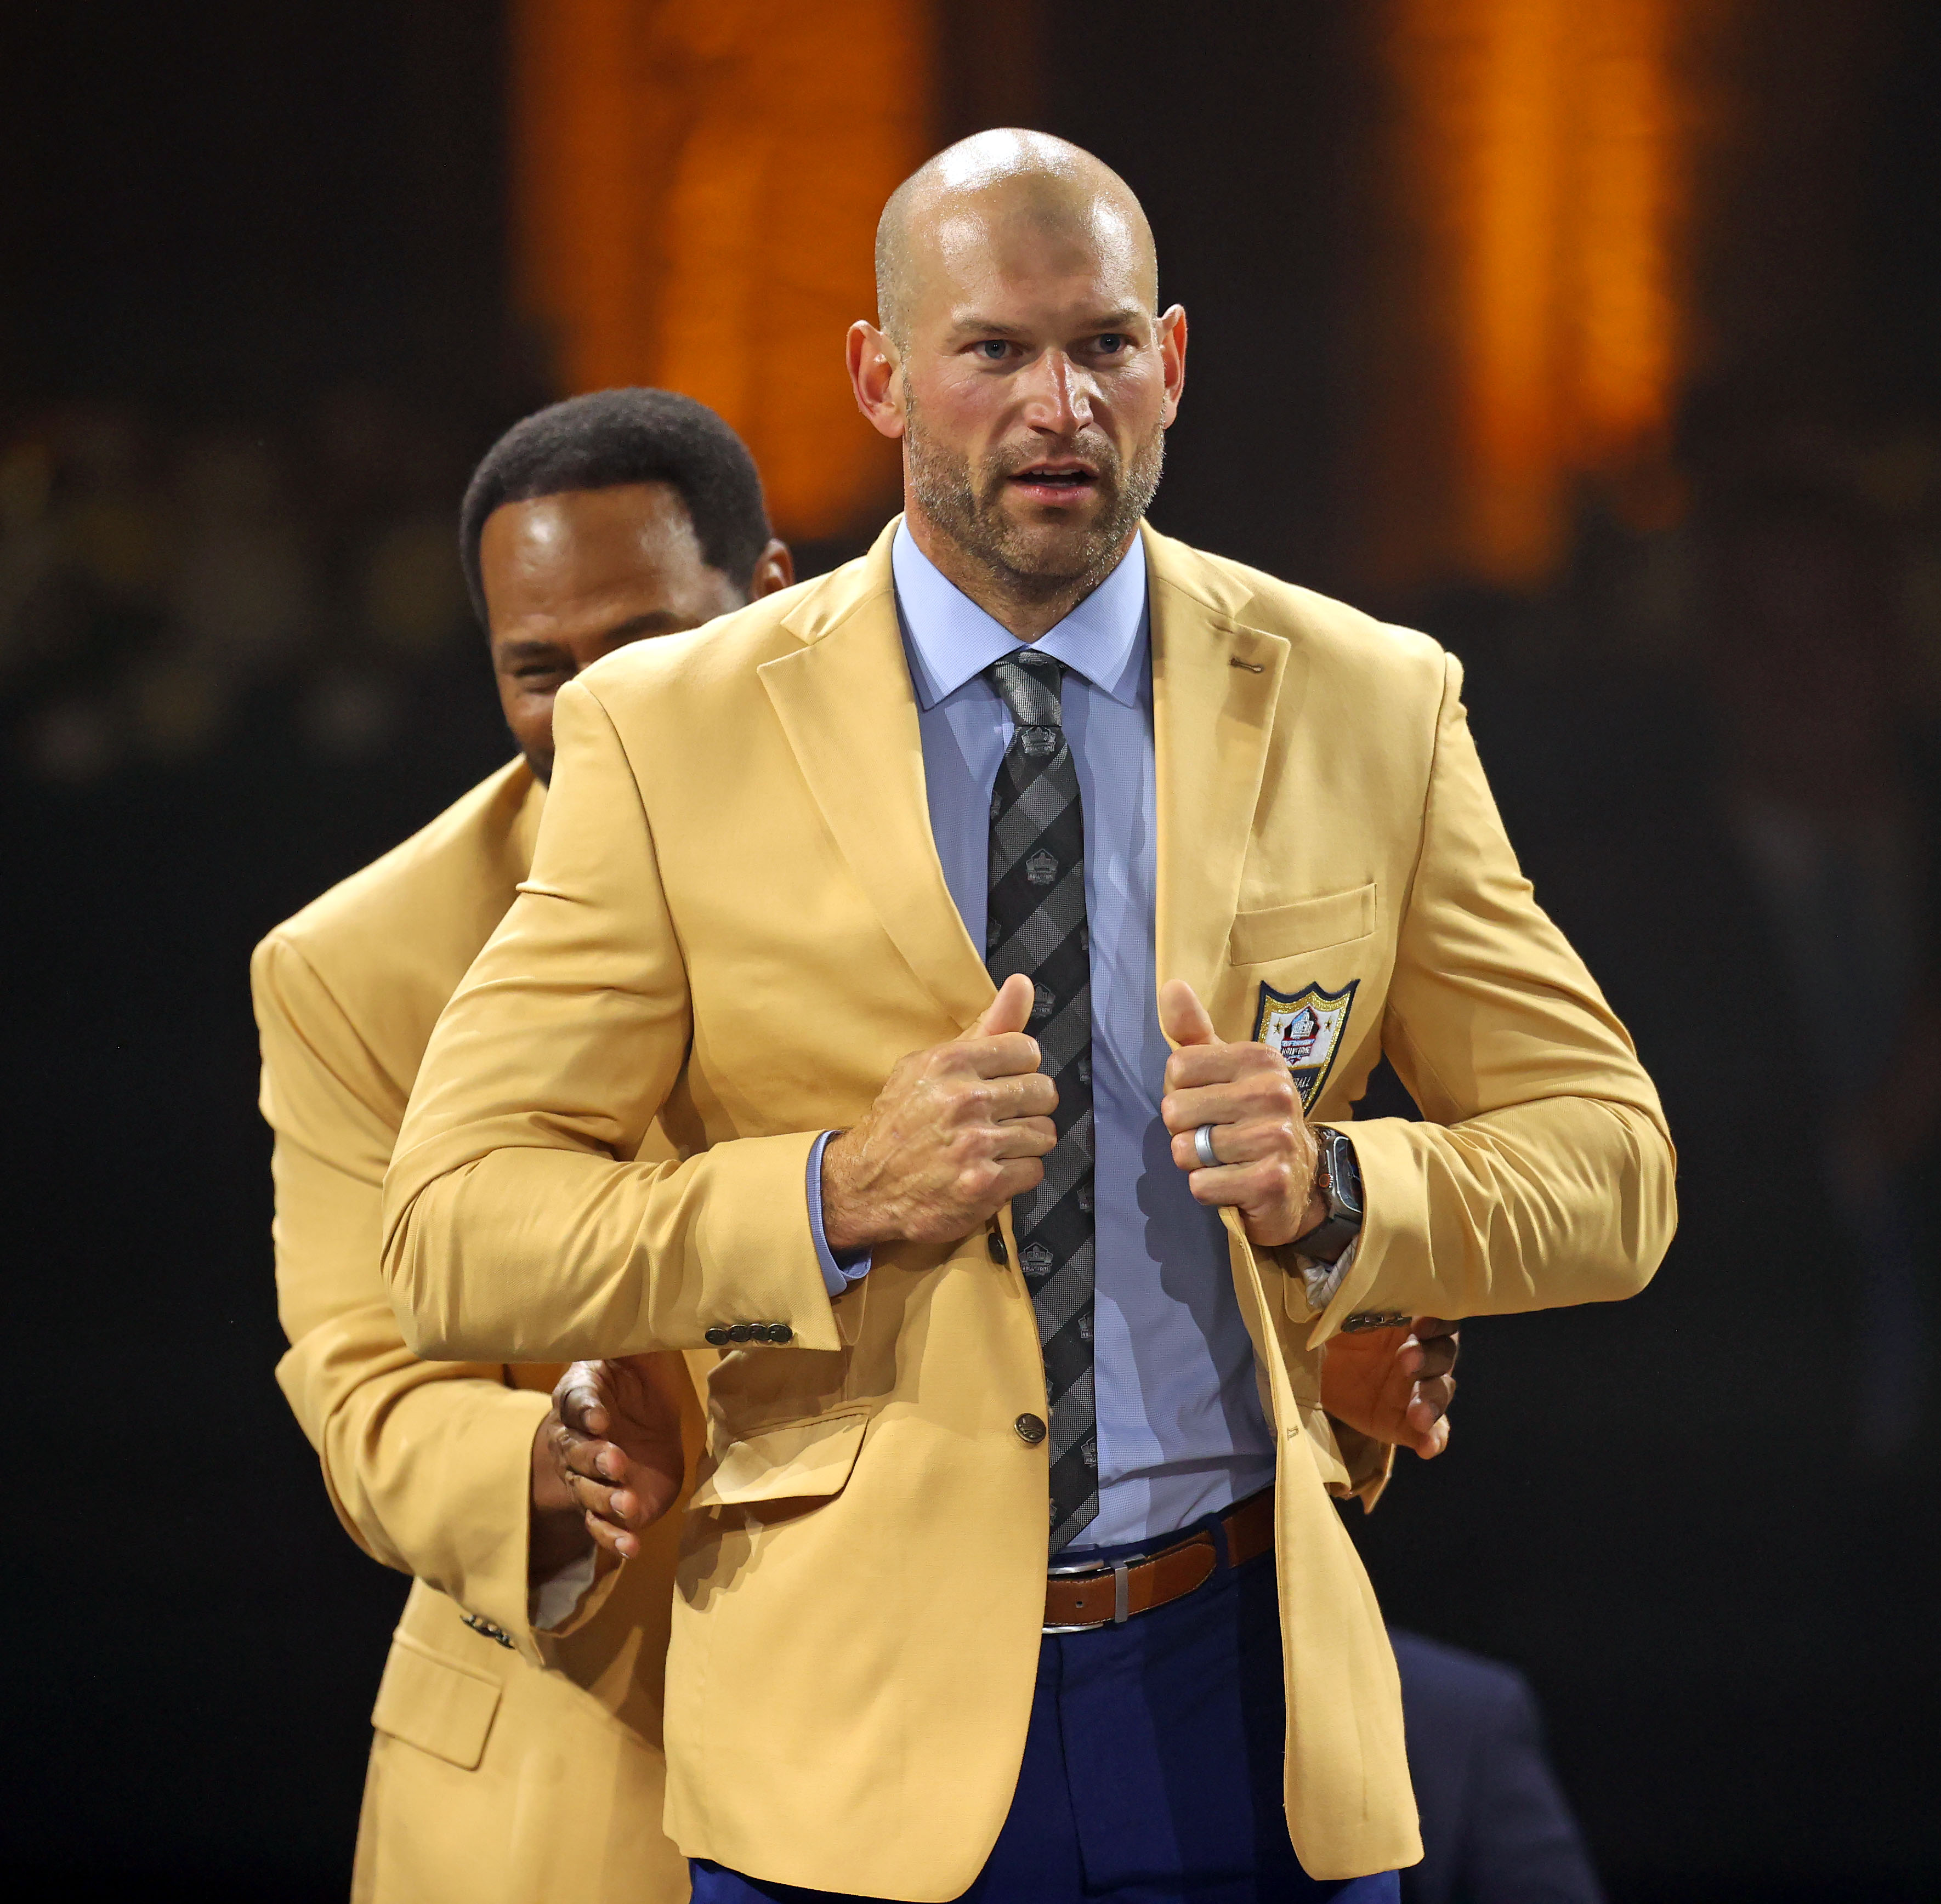 Pro Football Hall of Fame Gold Jacket Dinner, August 4, 2023